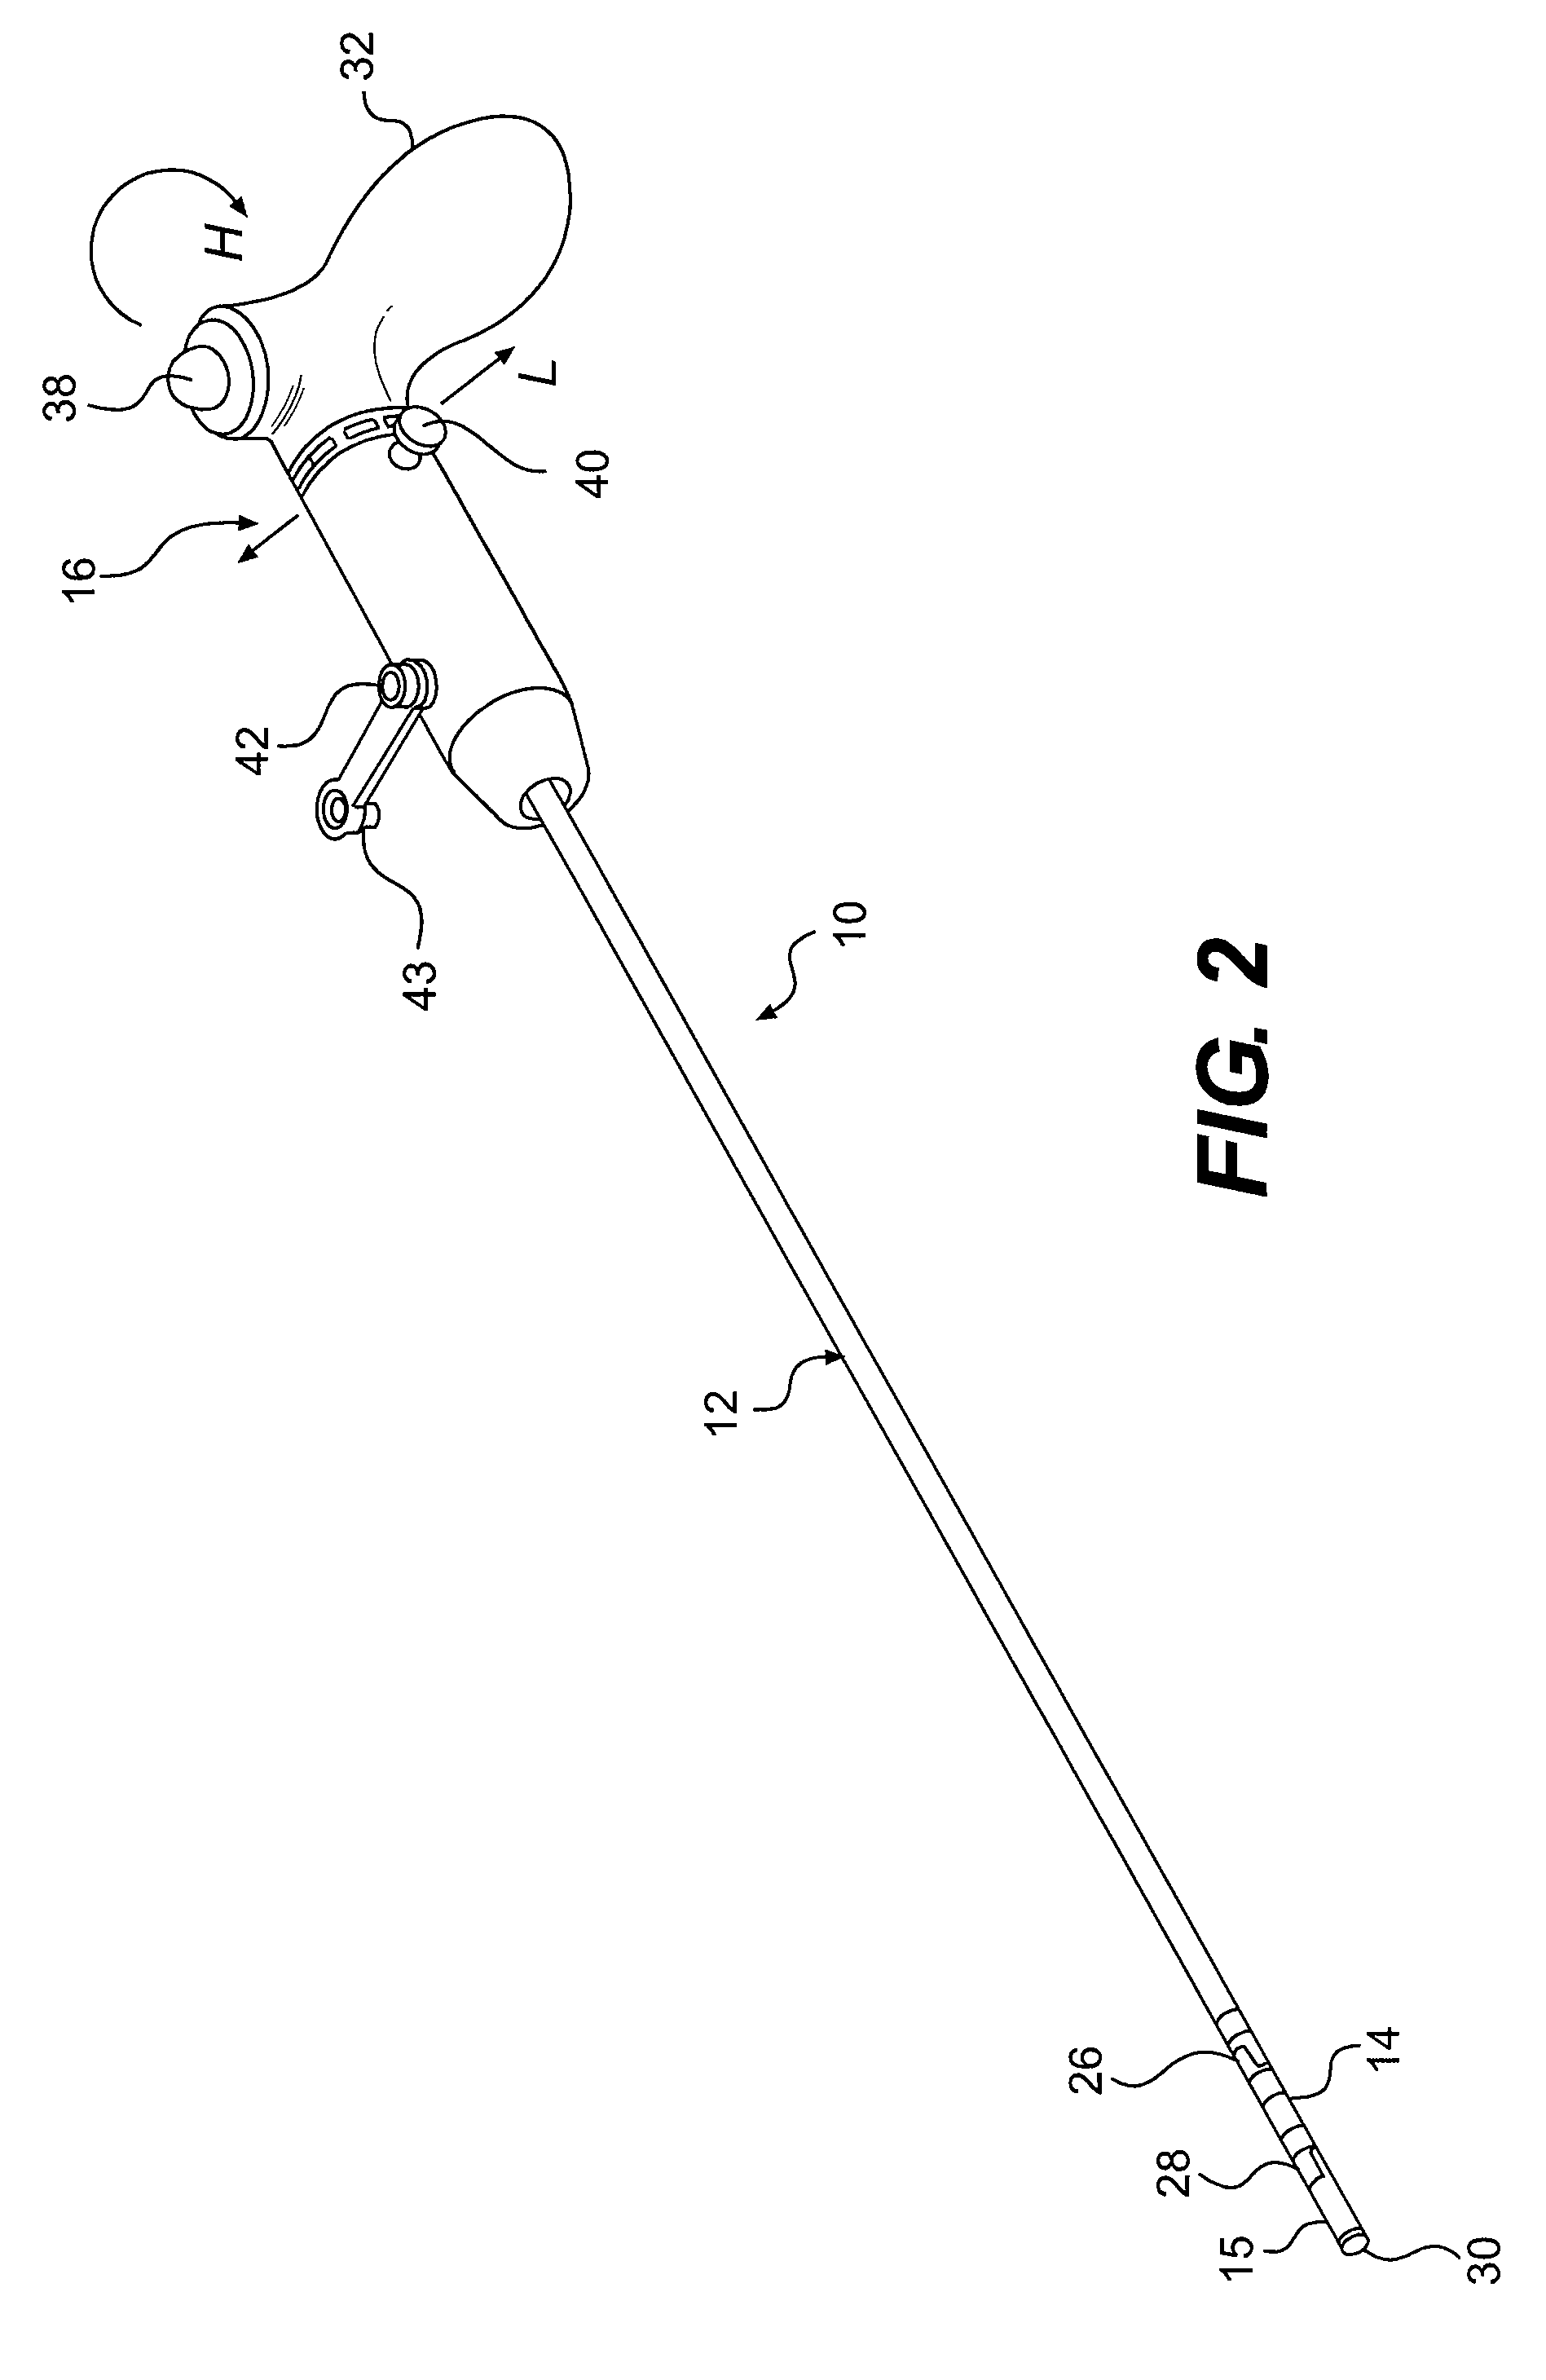 Articulable surgical instrument